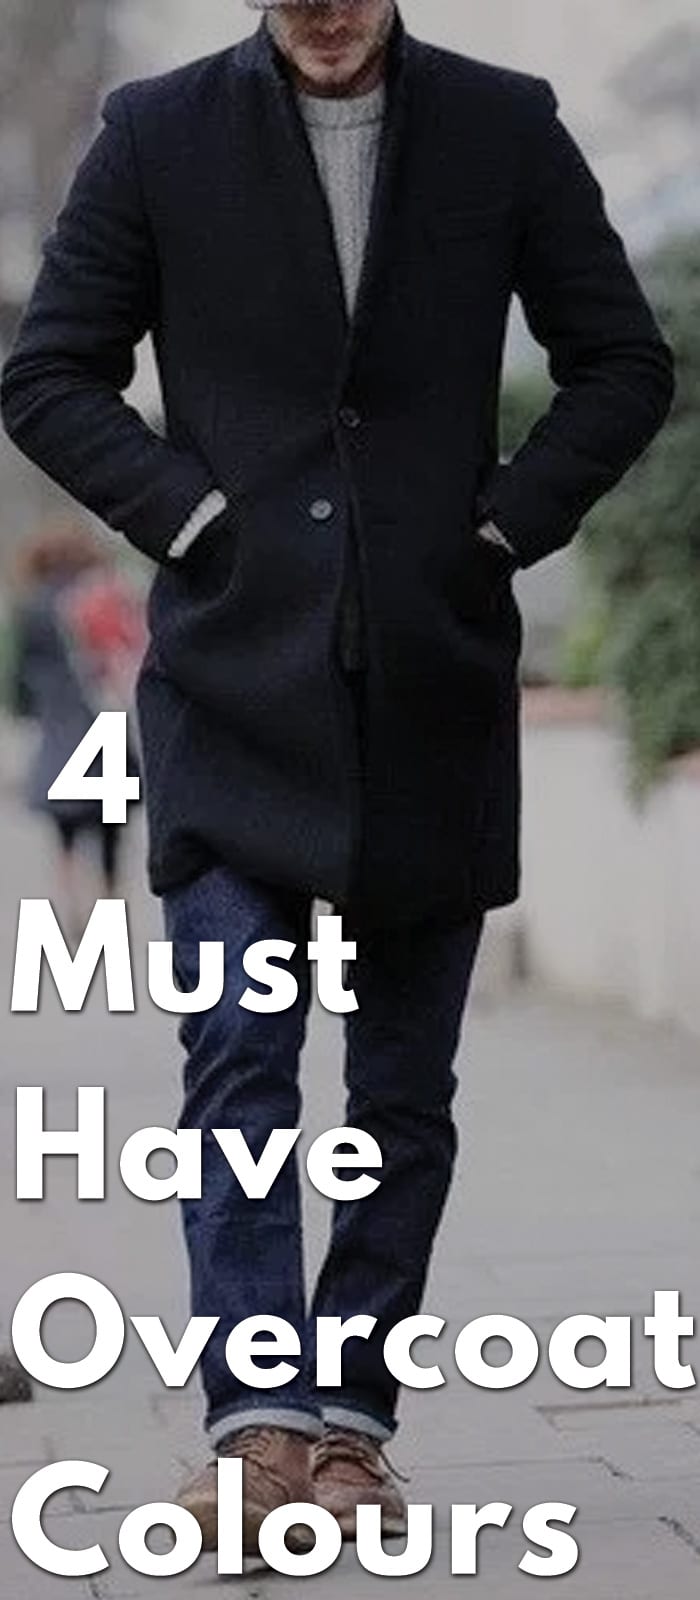 4-Must-Have-Overcoat-Colours